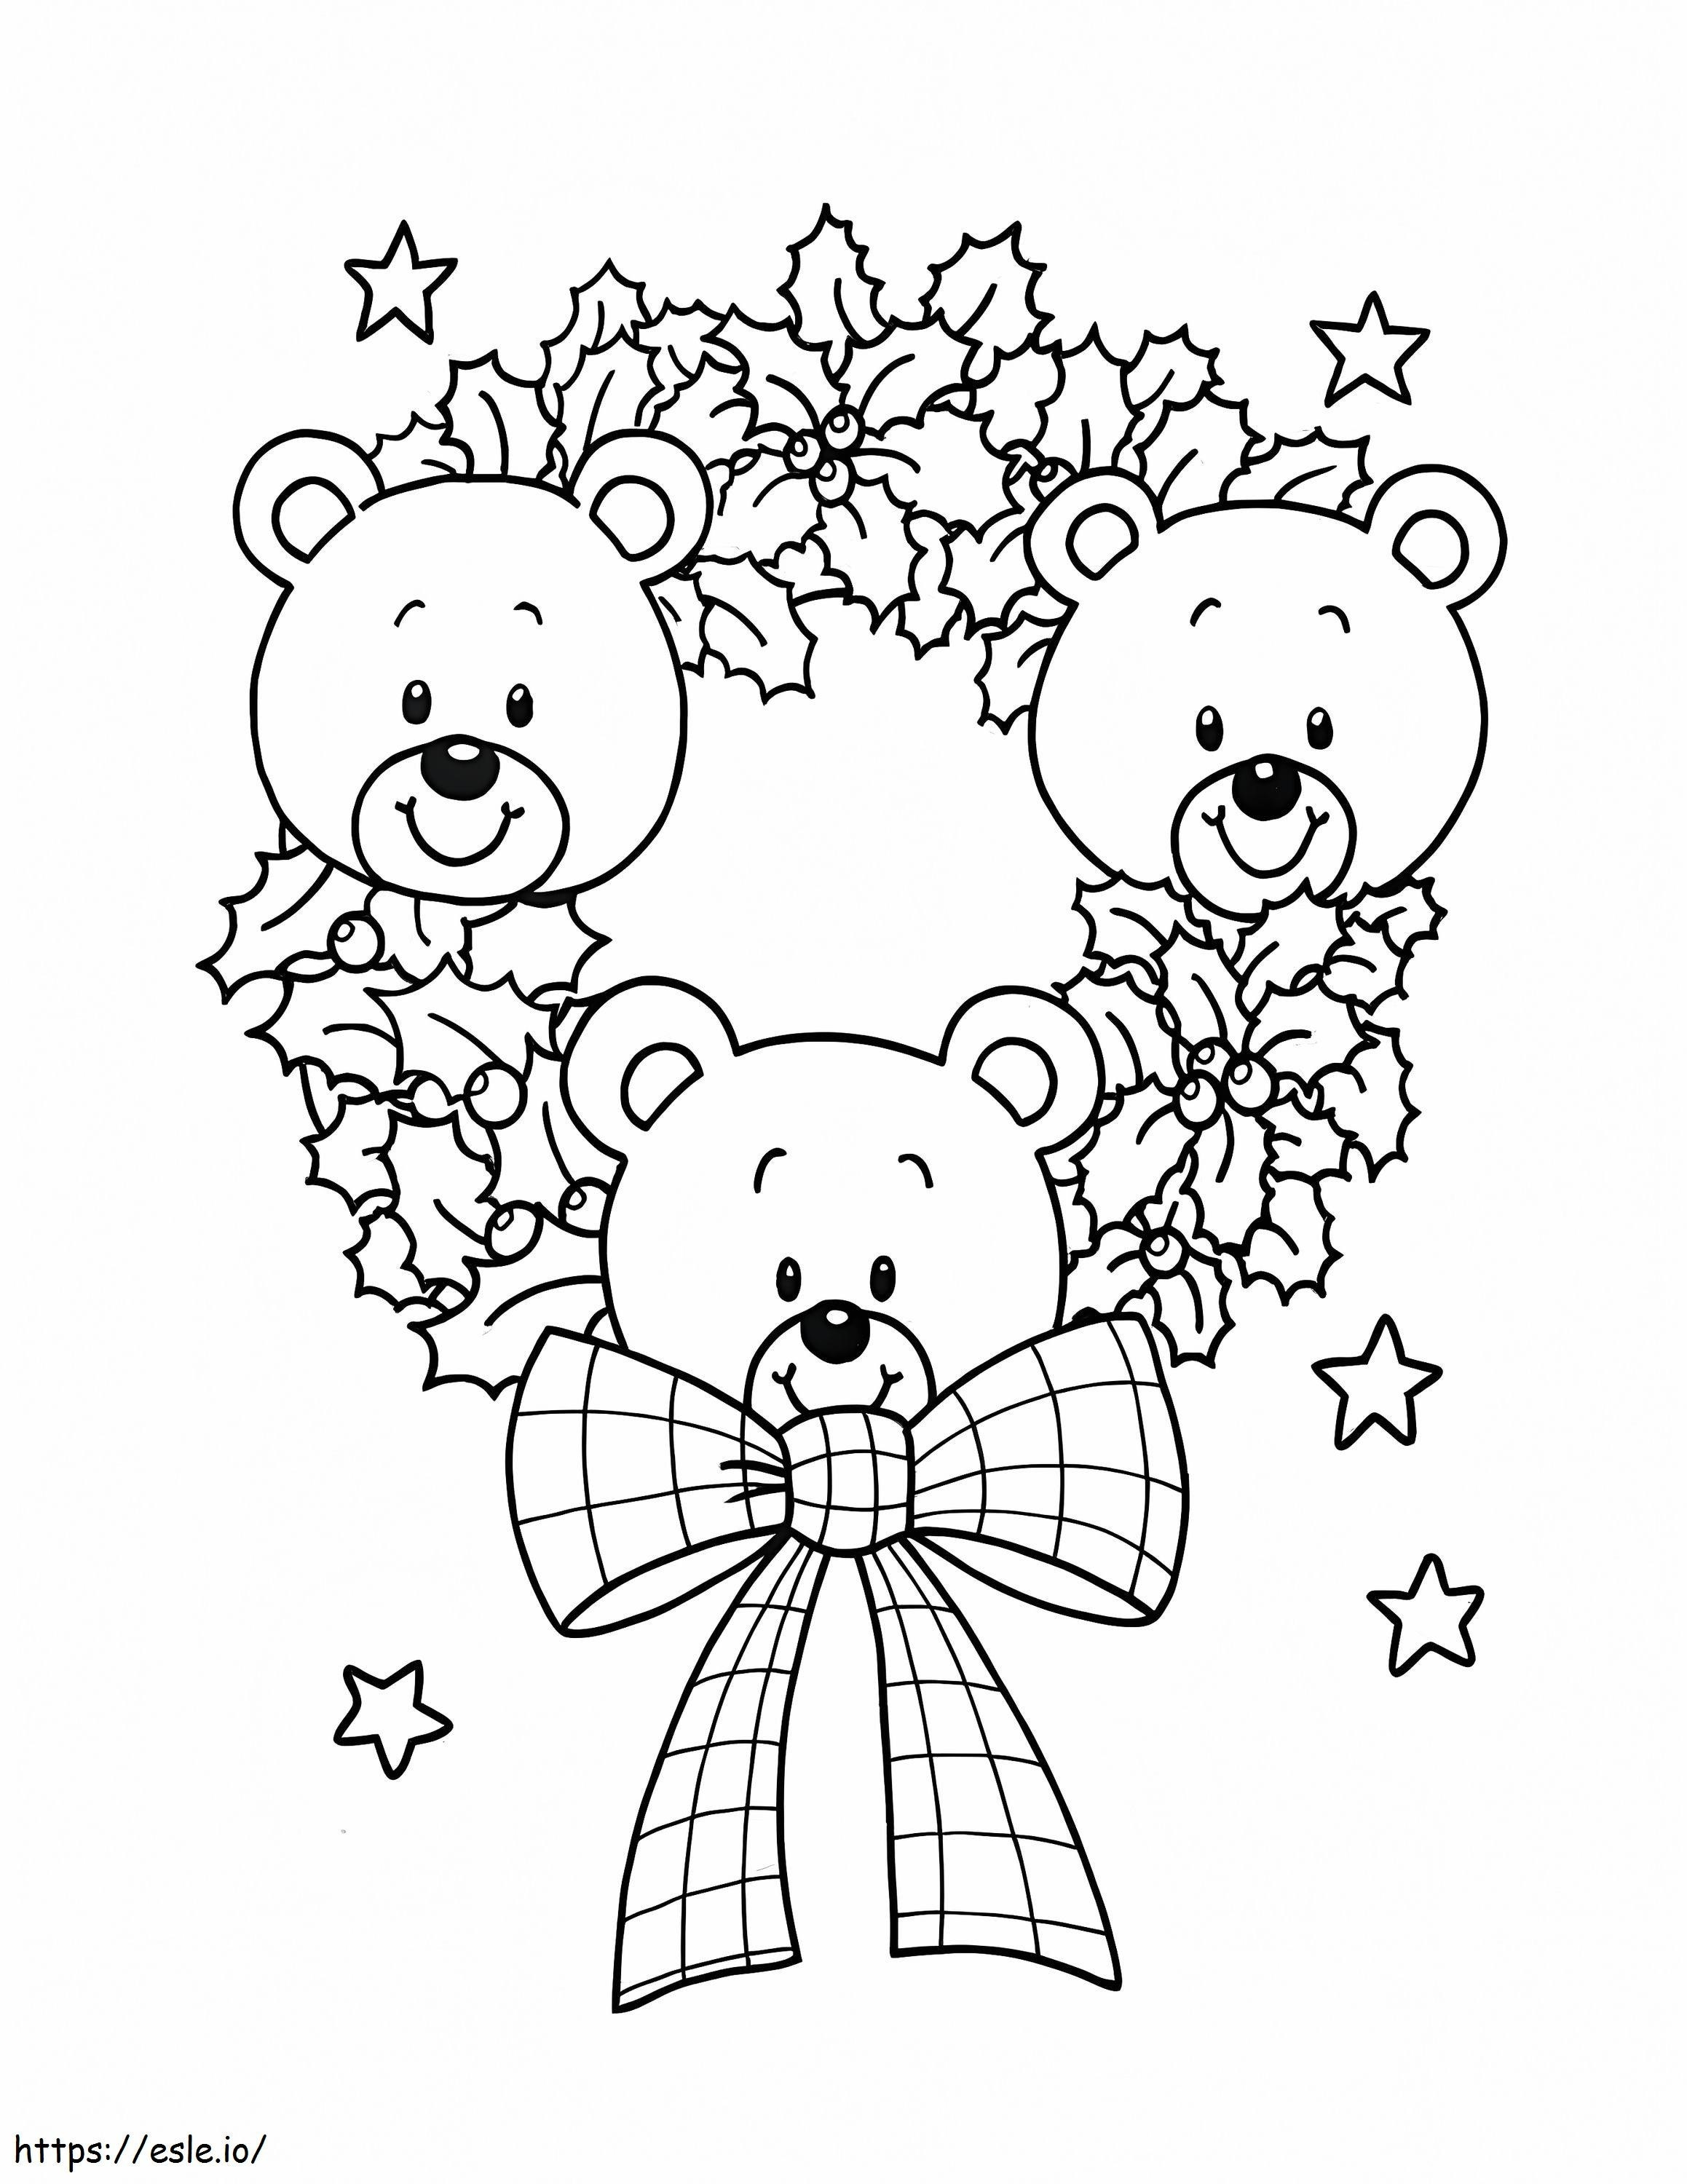 Christmas Wreath With Teddy Bears coloring page